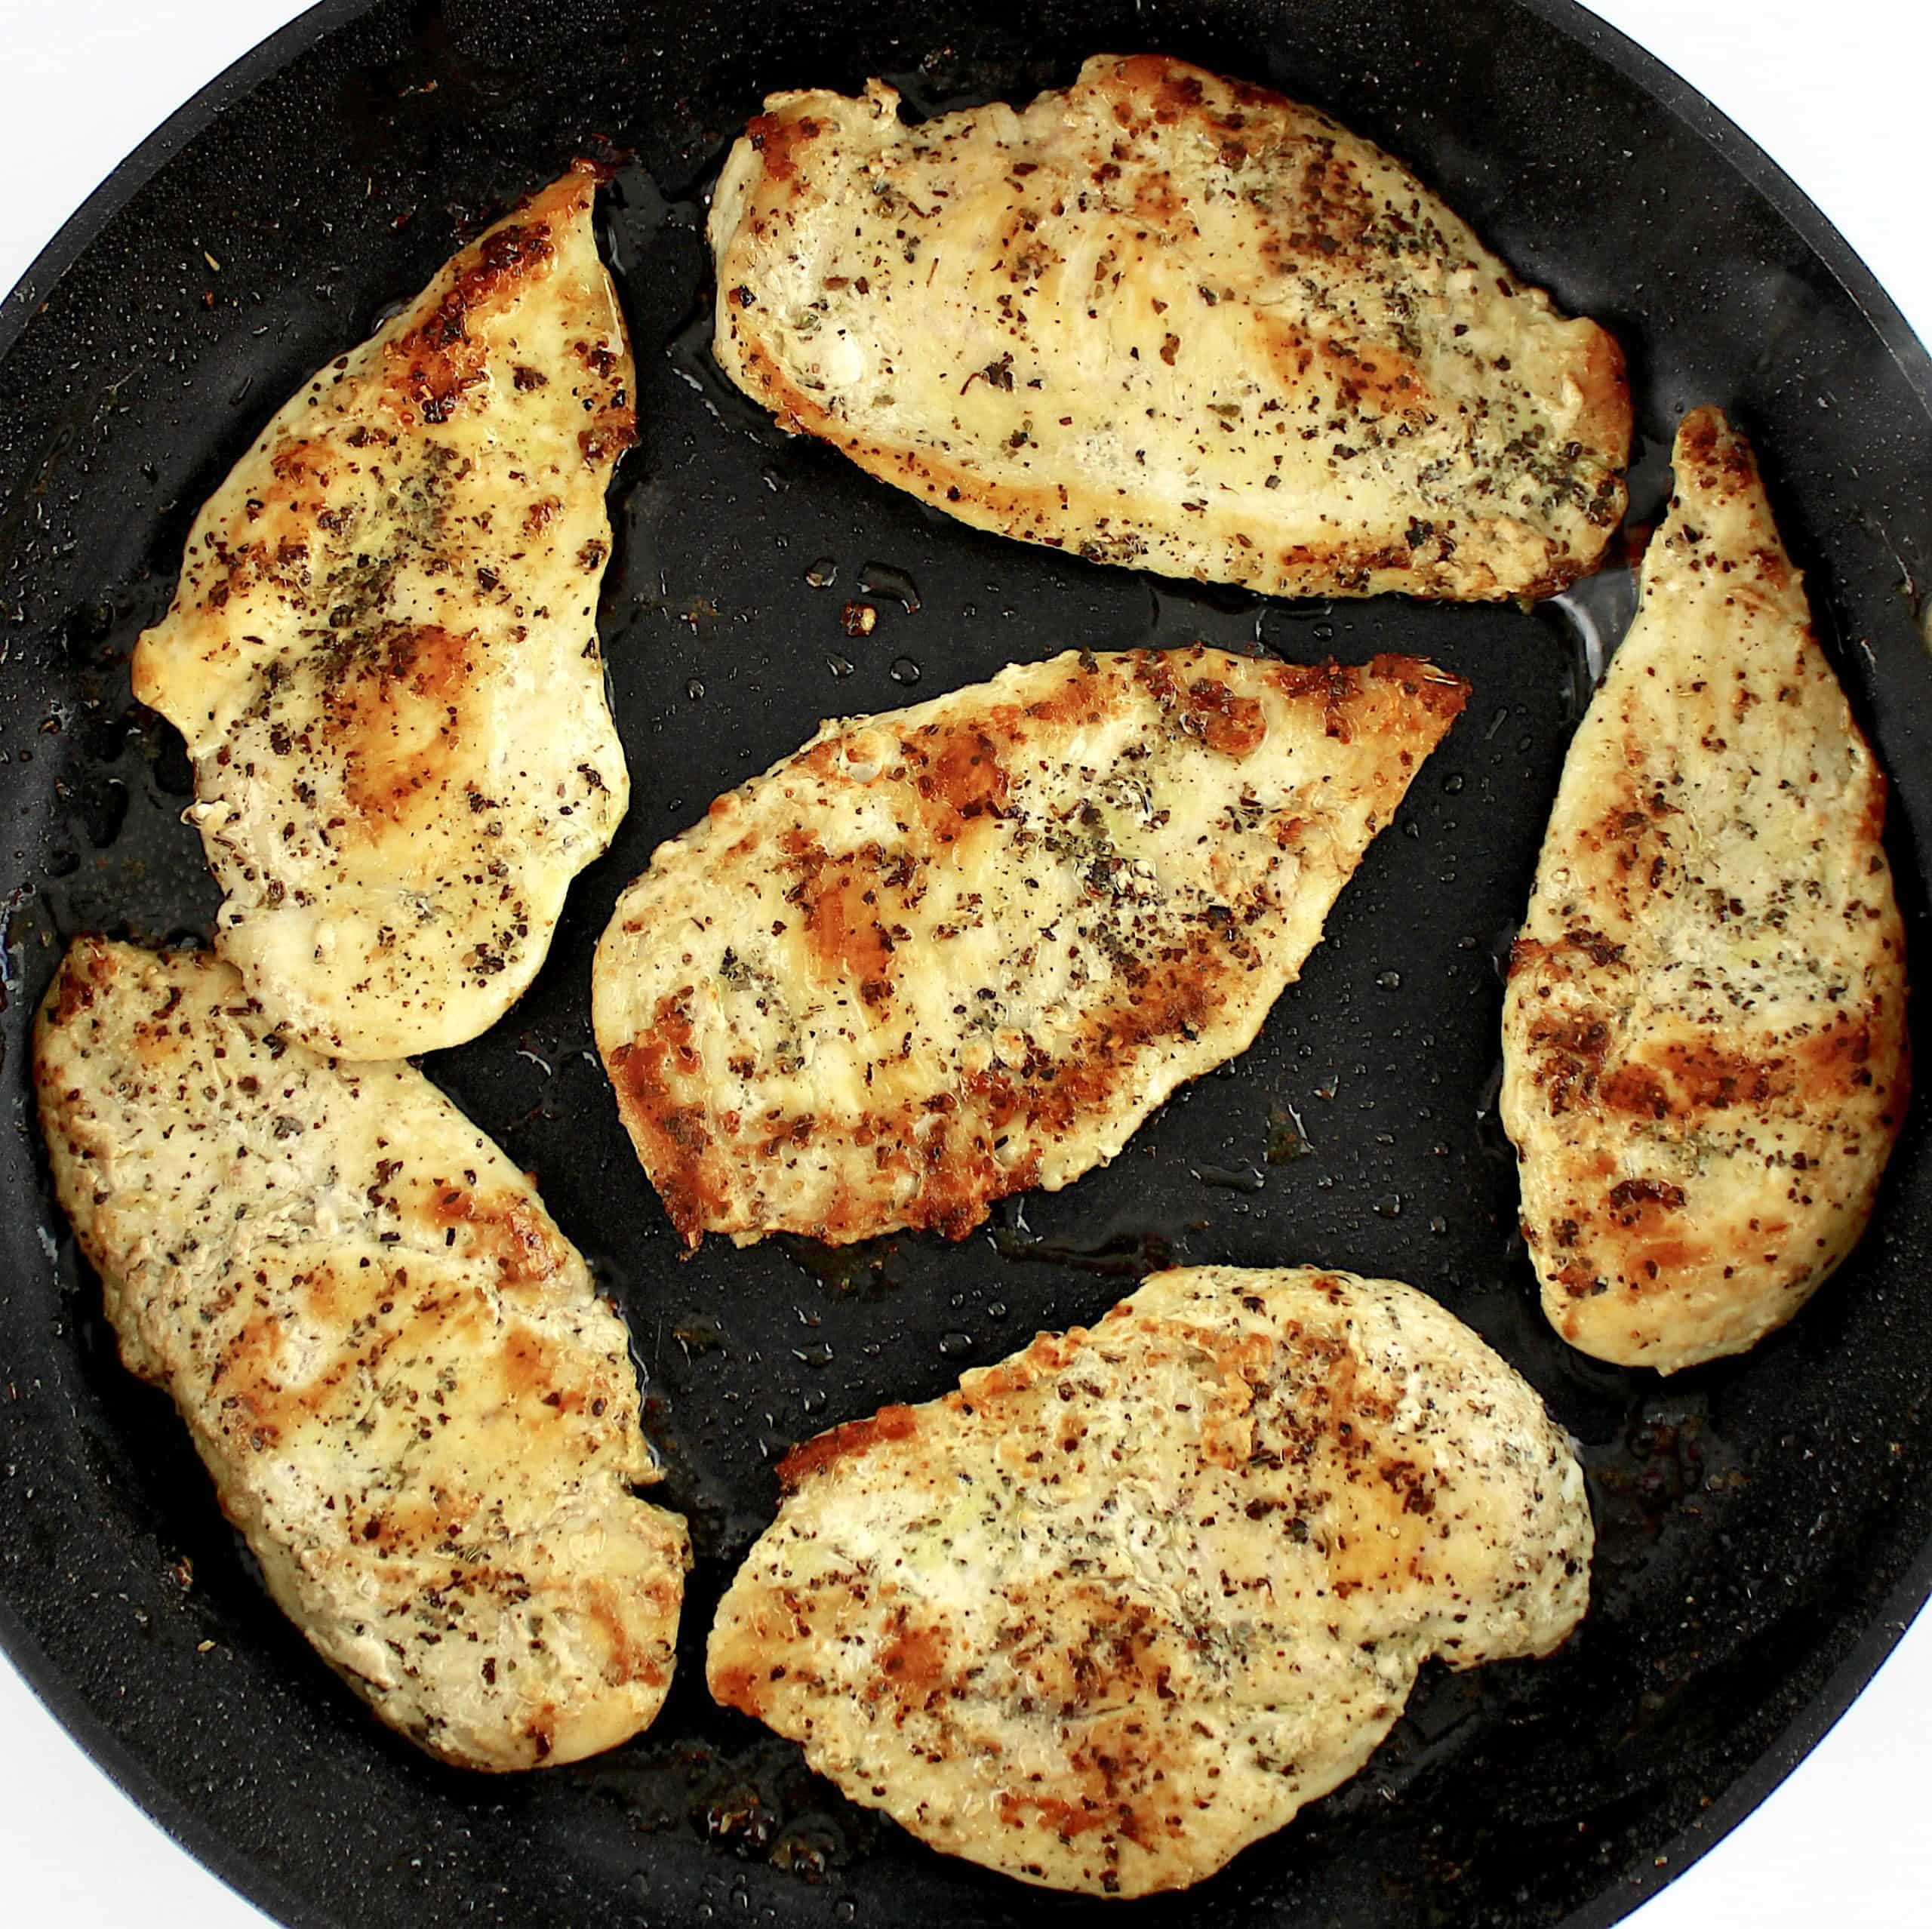 6 cooked chicken breasts with spices on top in skillet